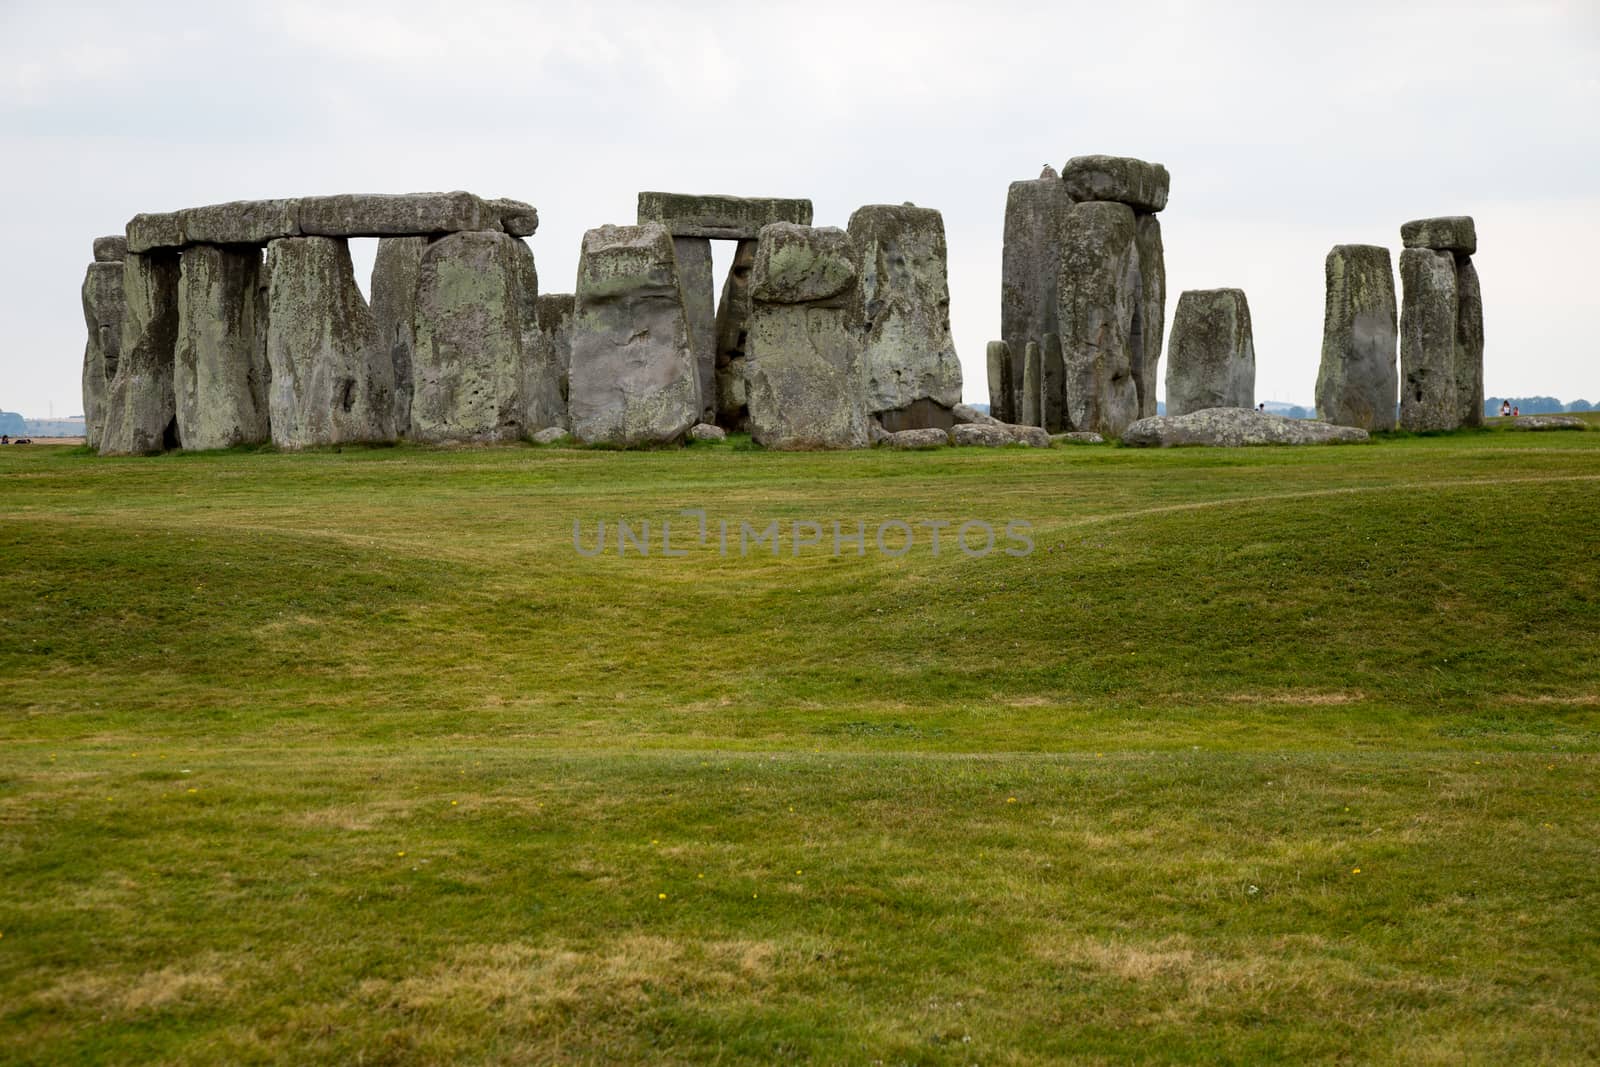 Stonehenge, Salisbury, Wiltshire England Standing neolithic stones  by kgboxford